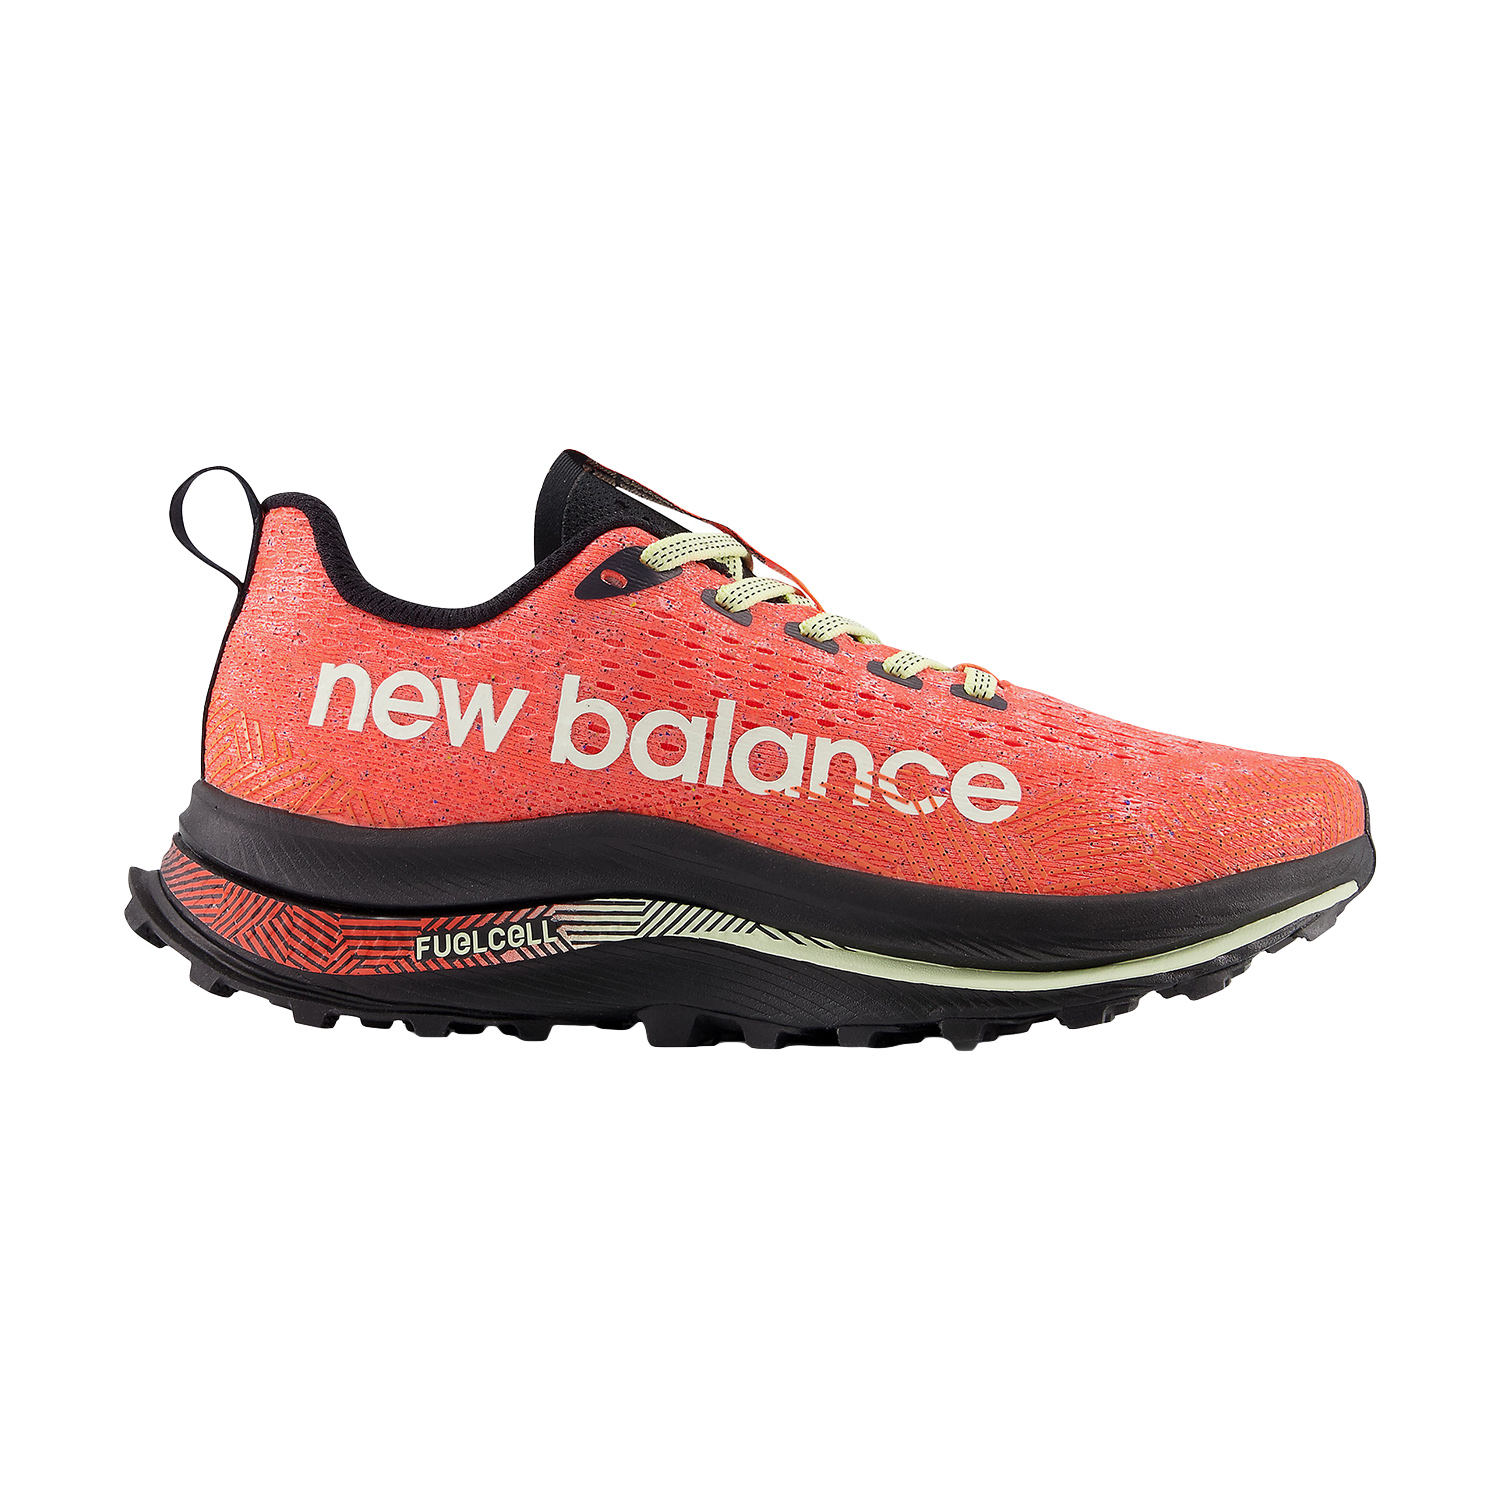 NEW BALANCE FUELCELL SUPERCOMP TRAIL trailrunning mujer en MisterRunning